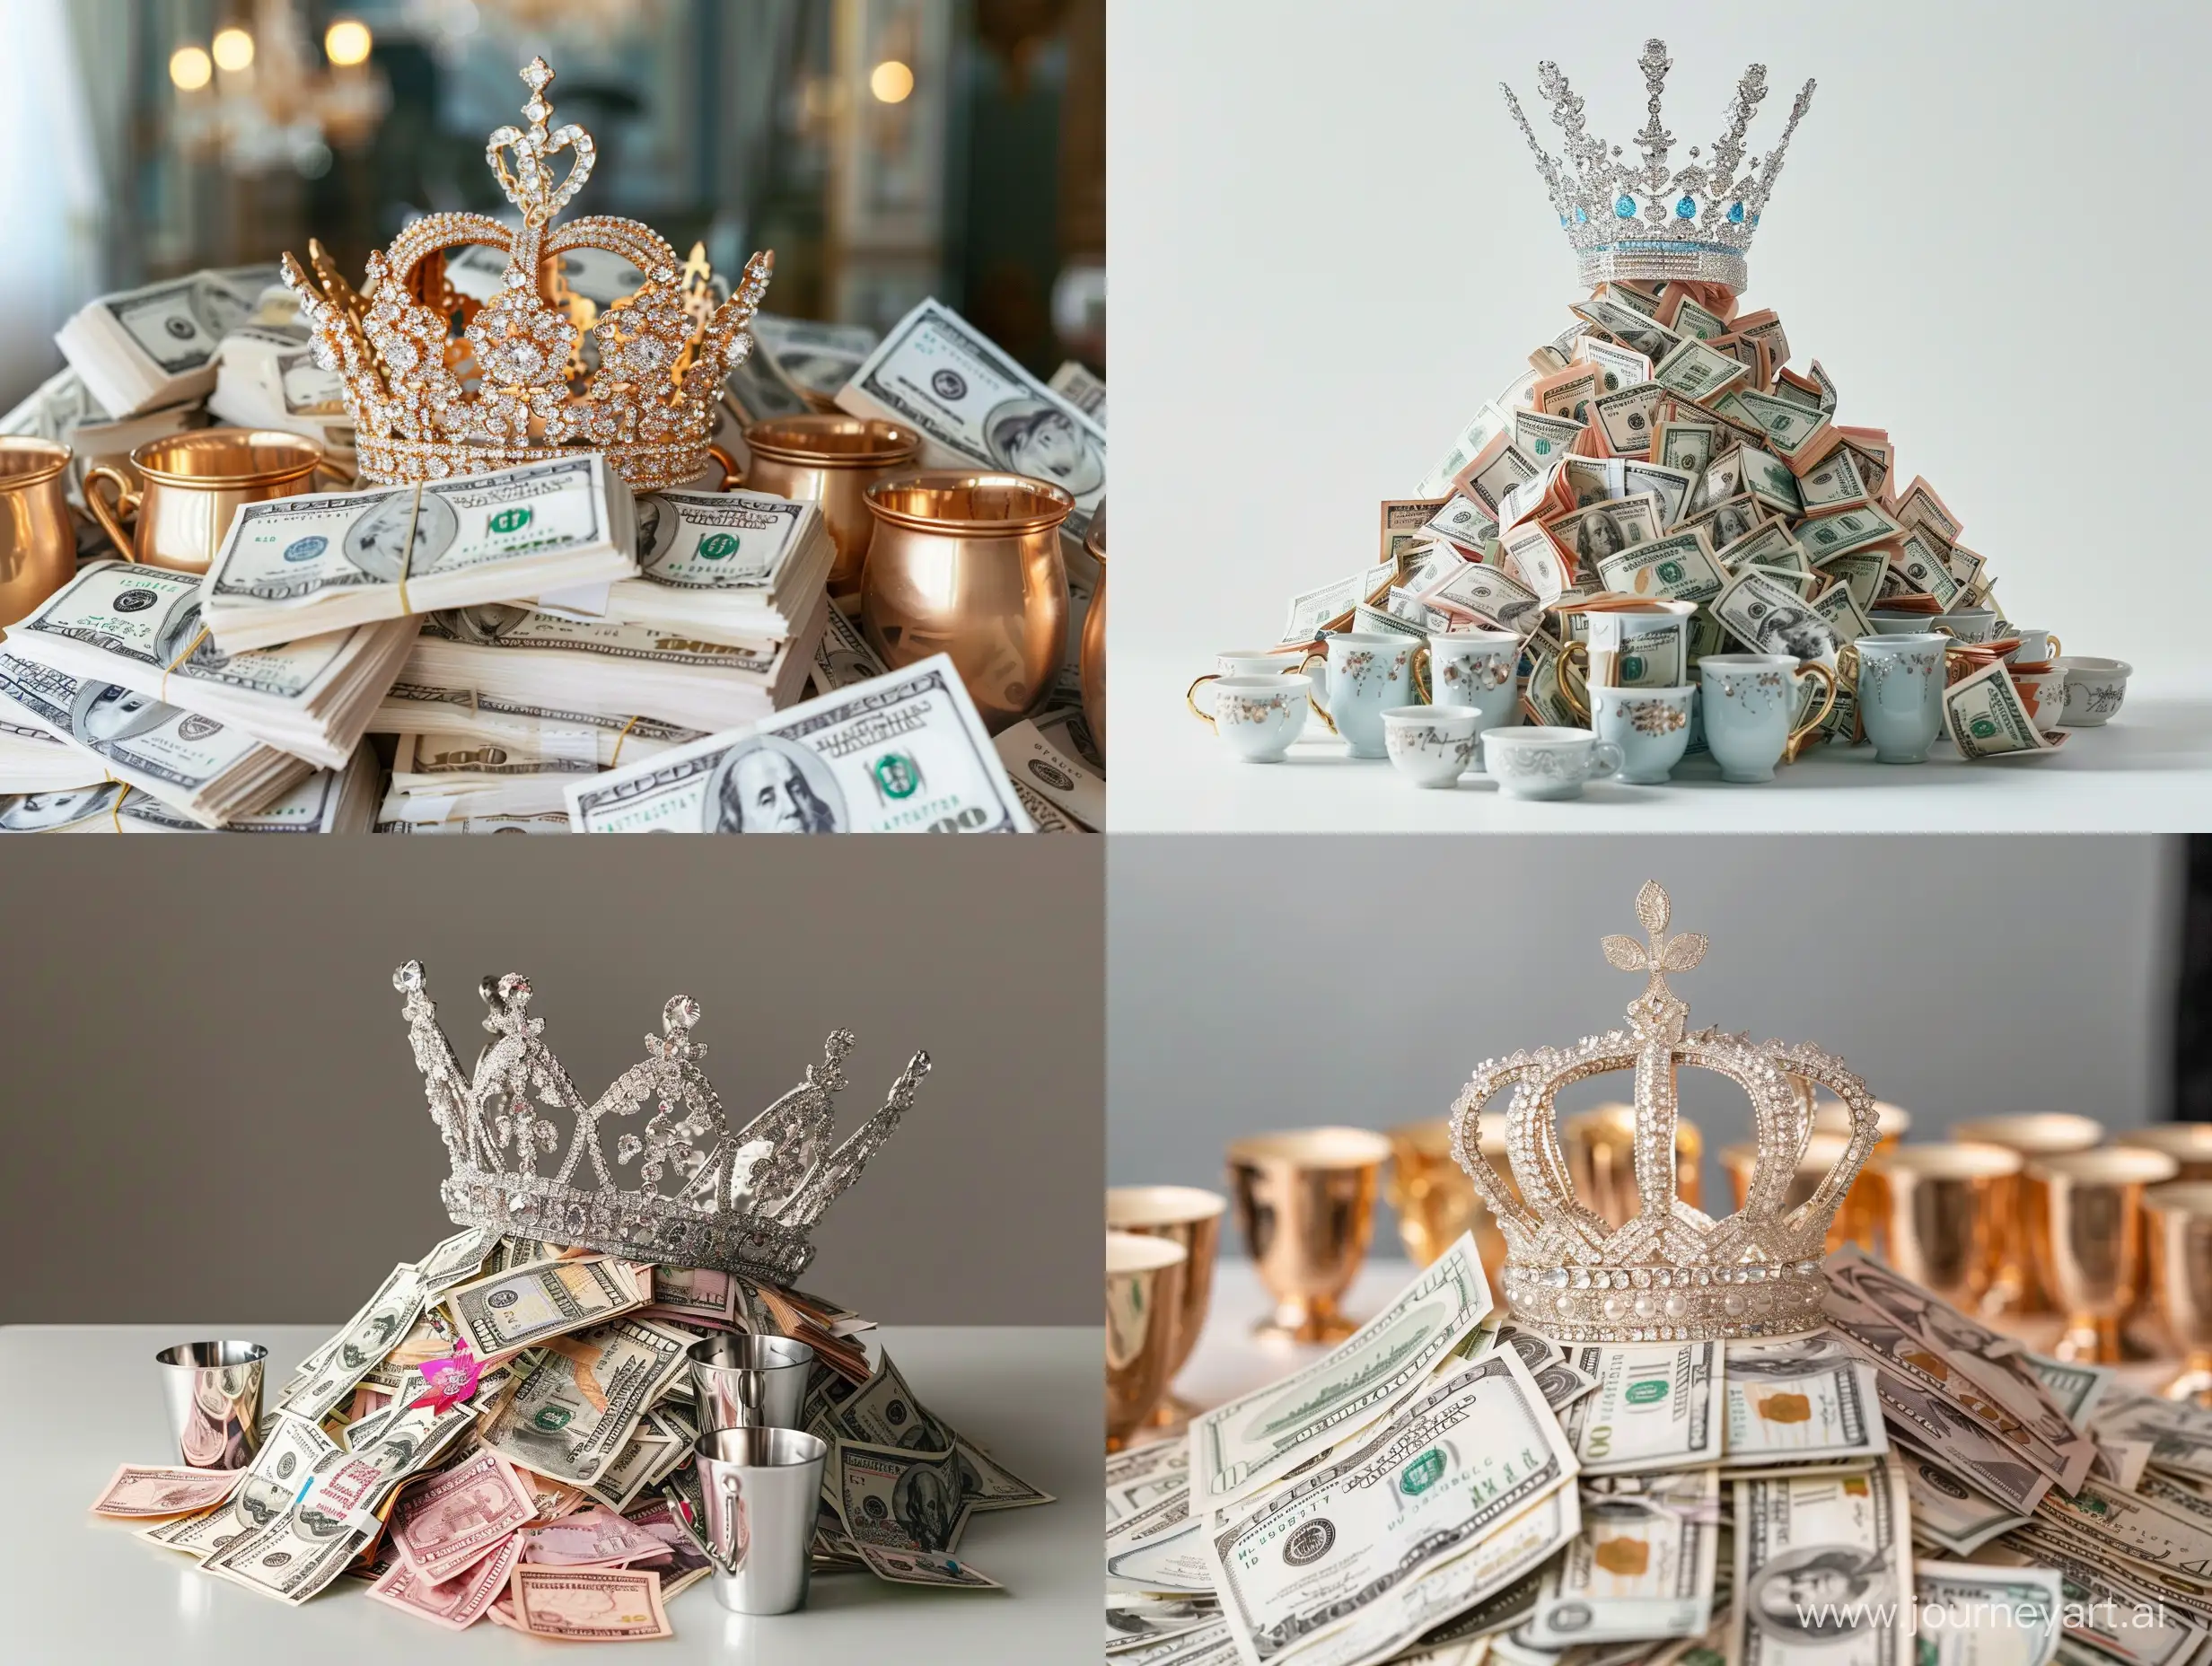 Elegant-Woman-with-Tiara-Surrounded-by-Wealth-and-Luxury